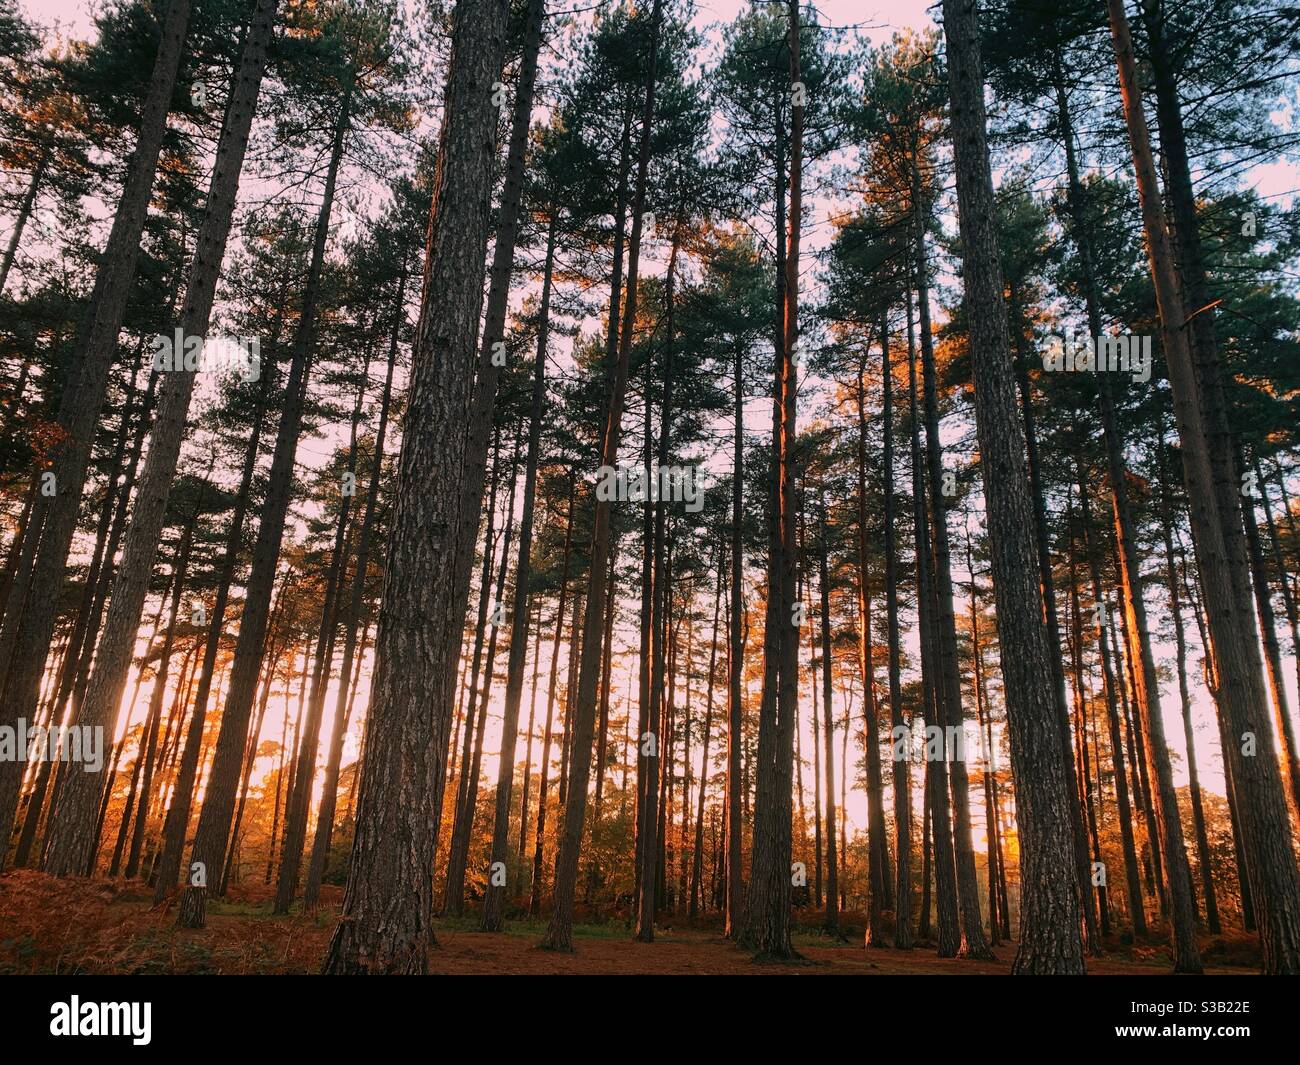 Forest woodland pine trees at sunset in Autumn Stock Photo